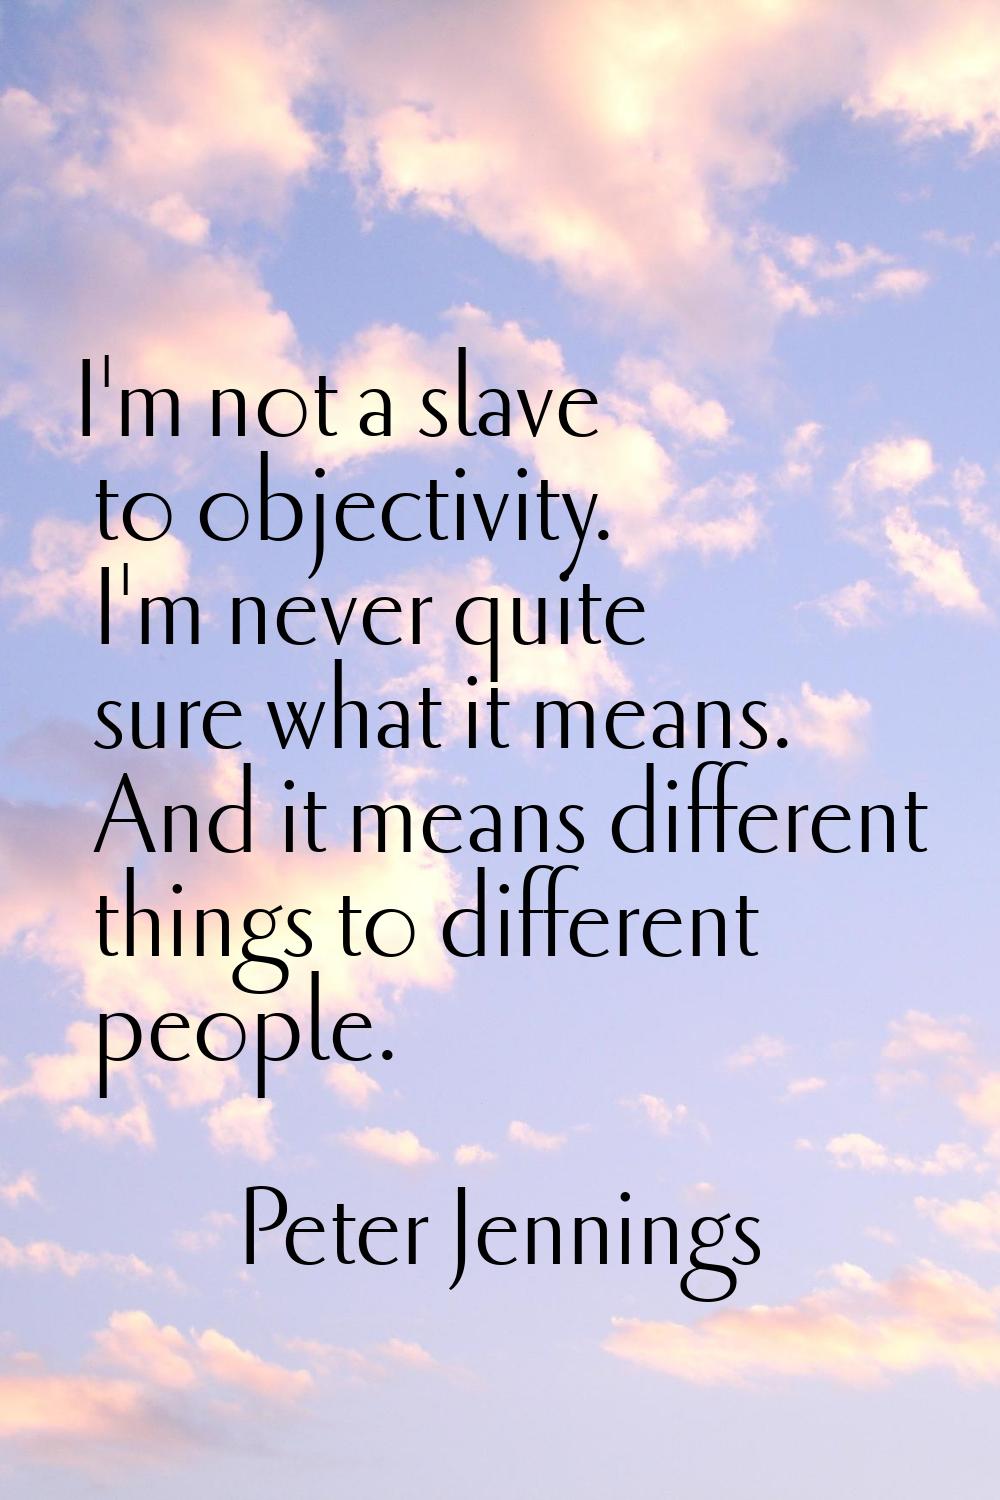 I'm not a slave to objectivity. I'm never quite sure what it means. And it means different things t